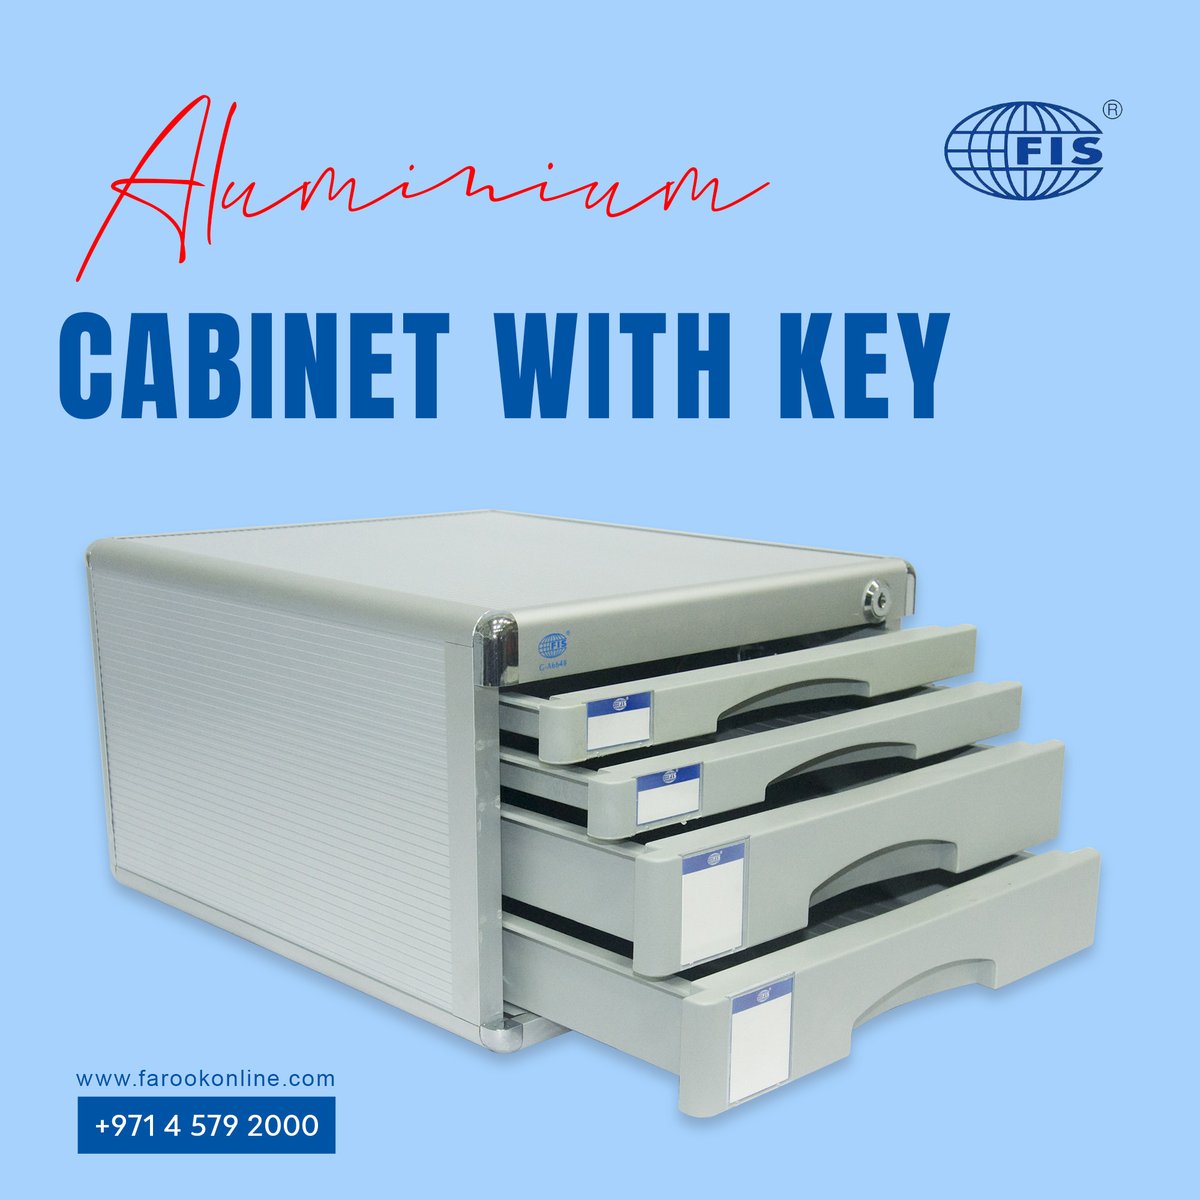 #FISaluminiumcabinet with key
.
Multiple drawers to store documents and files.
.
To buy #filecabinets
farookonline.com/category/file-…

 #FIS #stationery #officesupplies #officestationery #fisaluminiumfilecabinet #fisdocumentcabinet #cabinet #documentcabinet #aluminiumcabinet